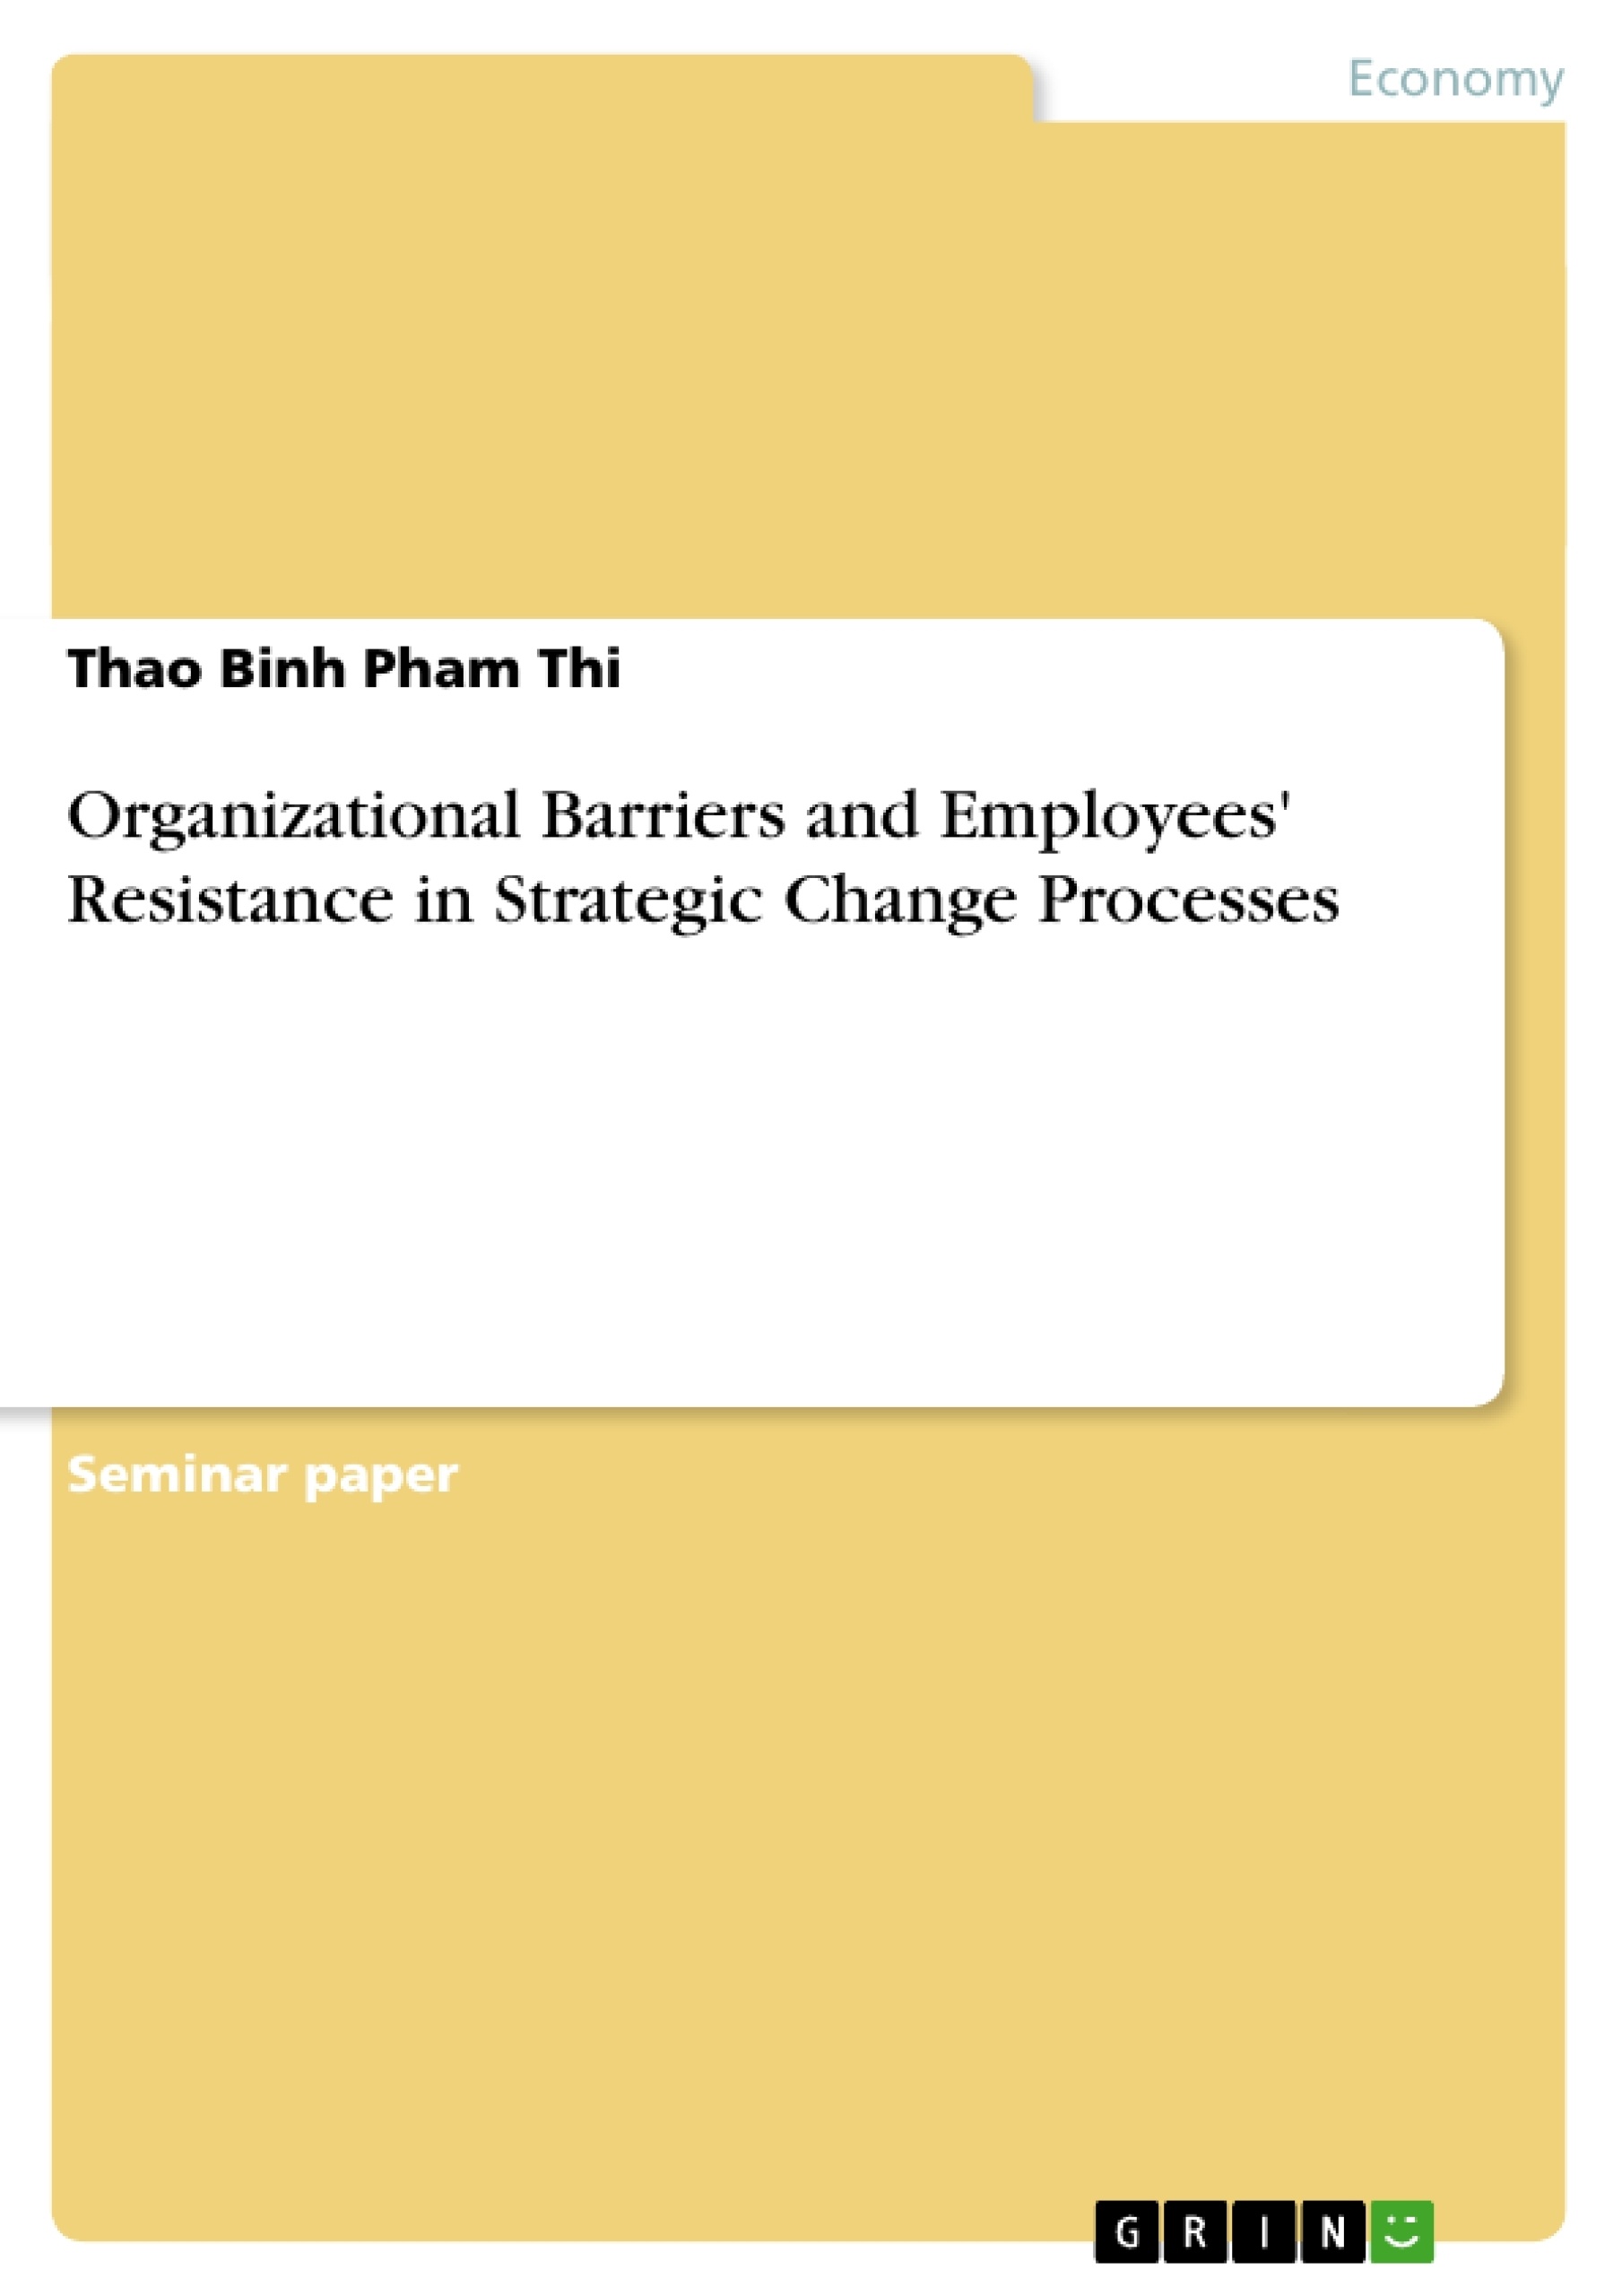 Title: Organizational Barriers and Employees' Resistance in Strategic Change Processes